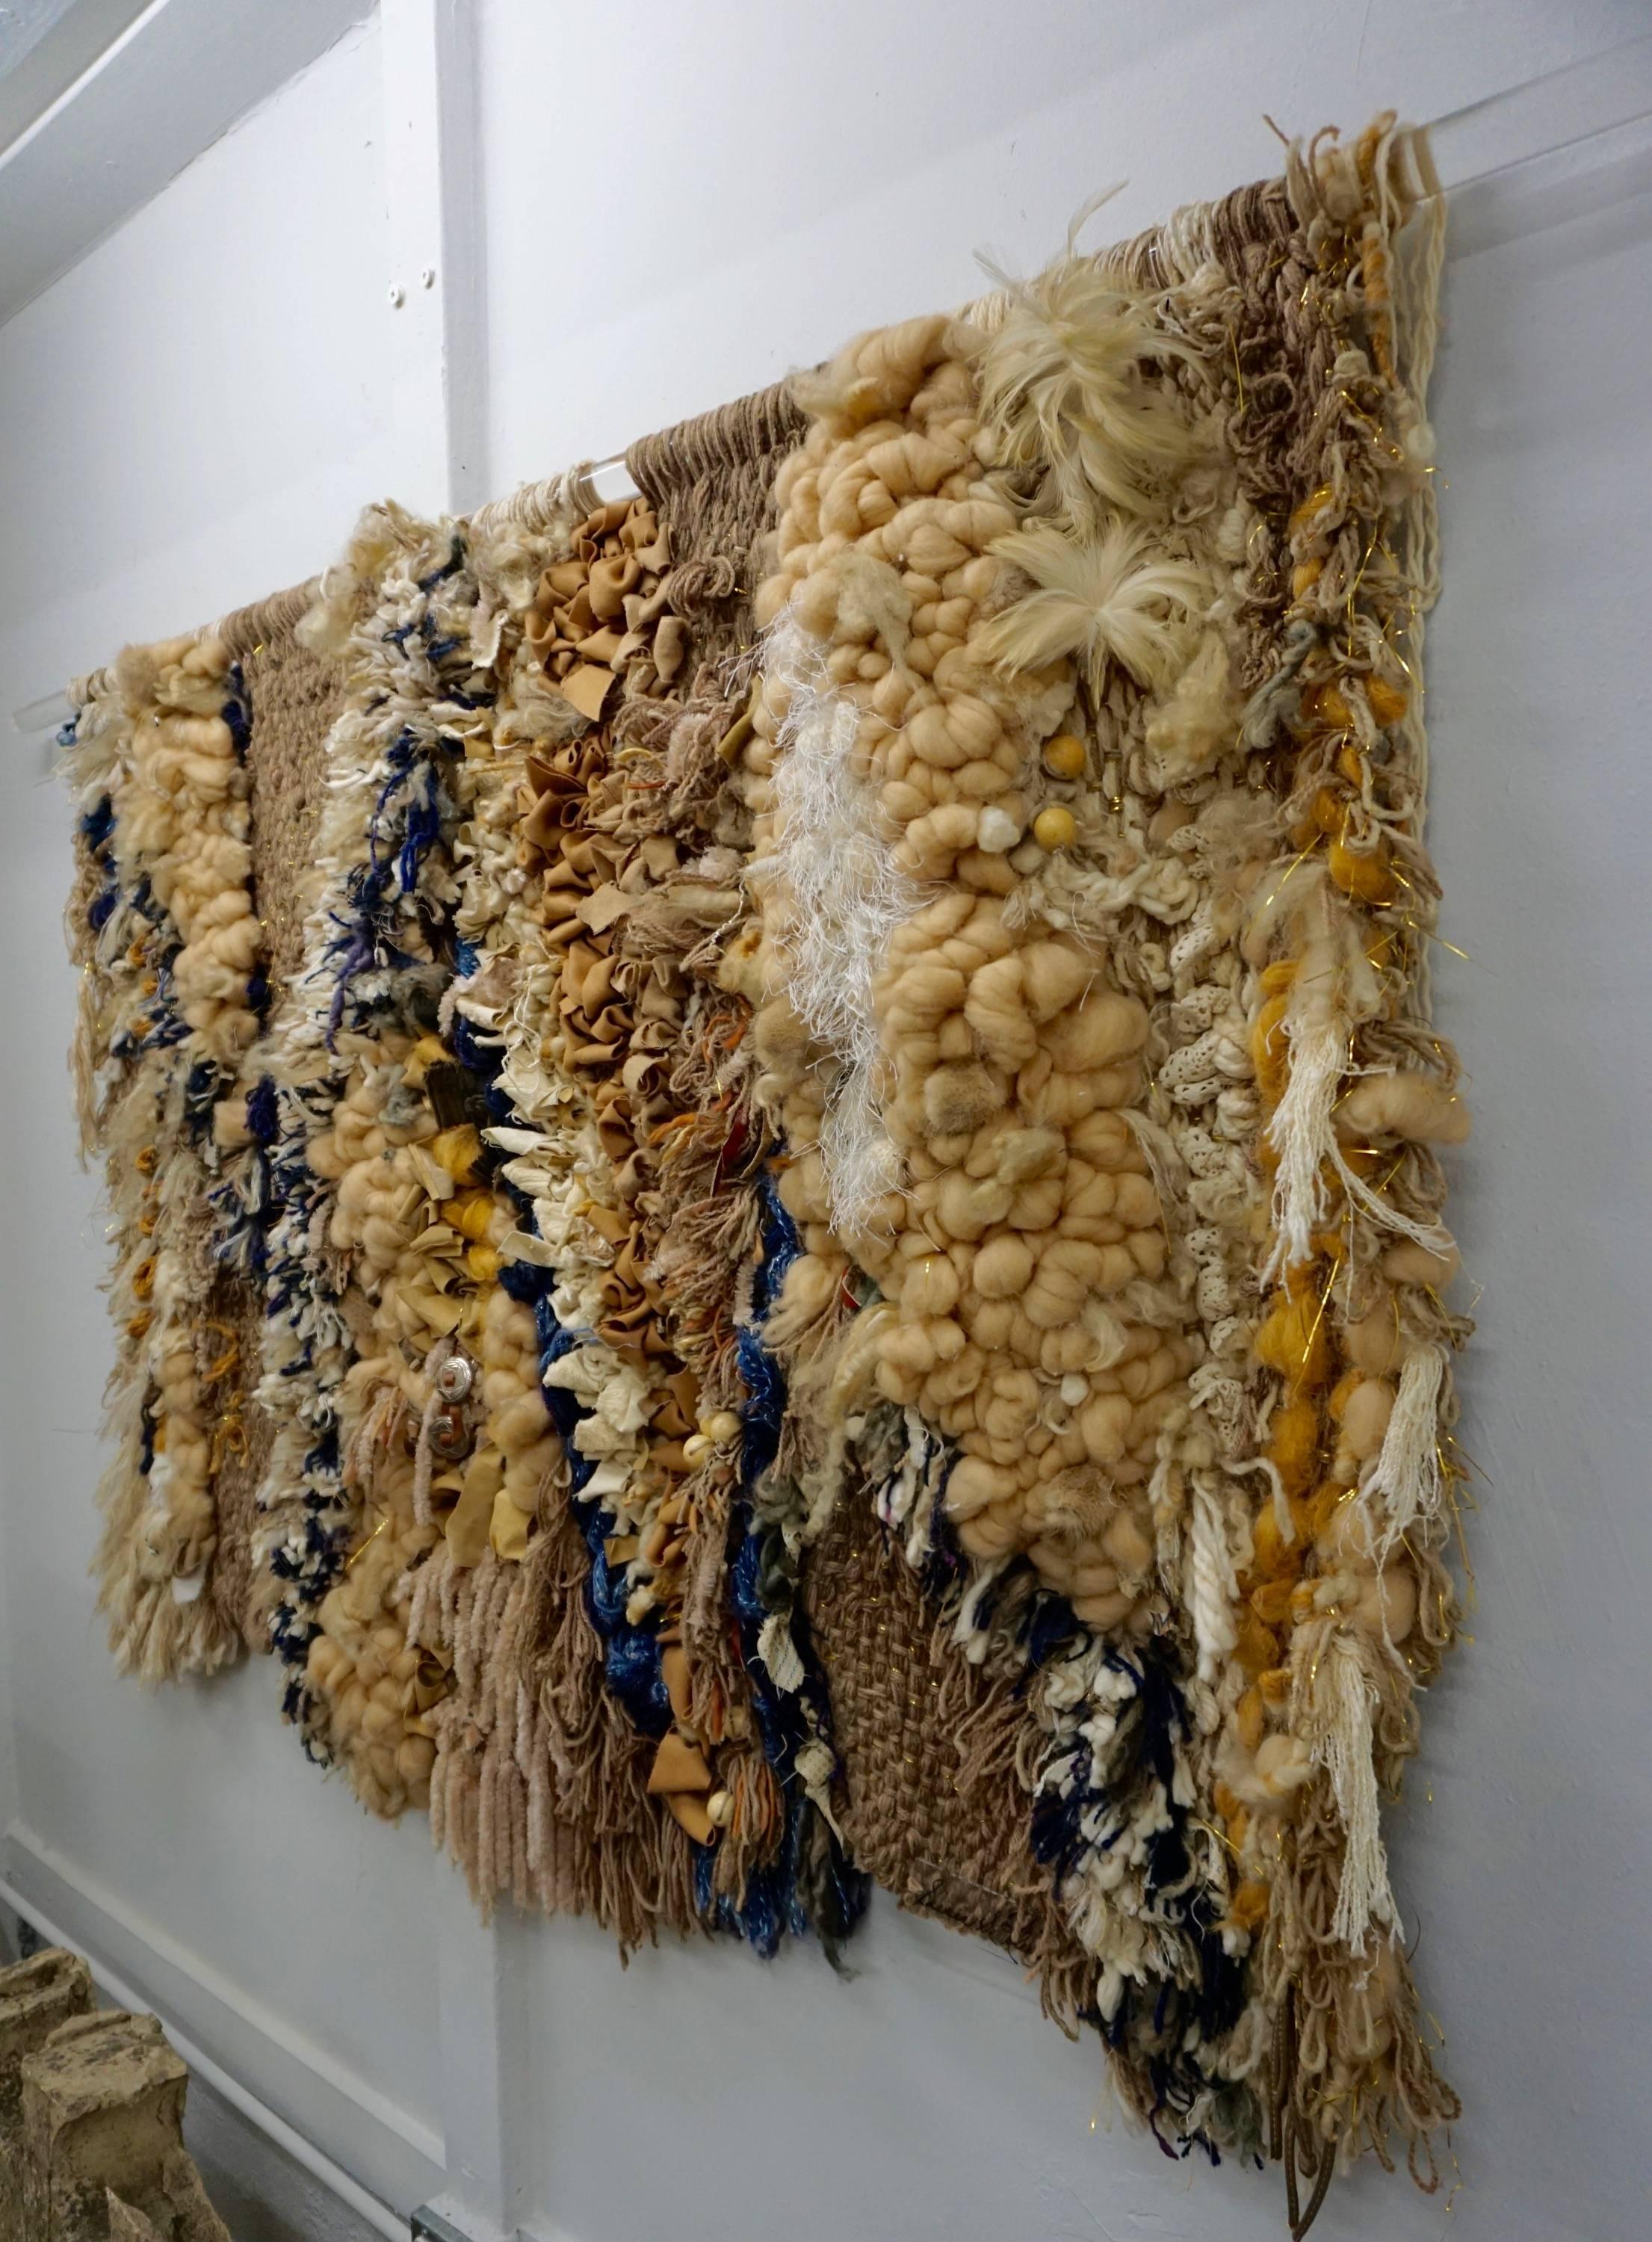 Highly textured with embellishments of leather, wood beads, feathers, lace, tufted wool, rope and conches. Signed by the artist on a piece of Lucite and hung on a Lucite rod.